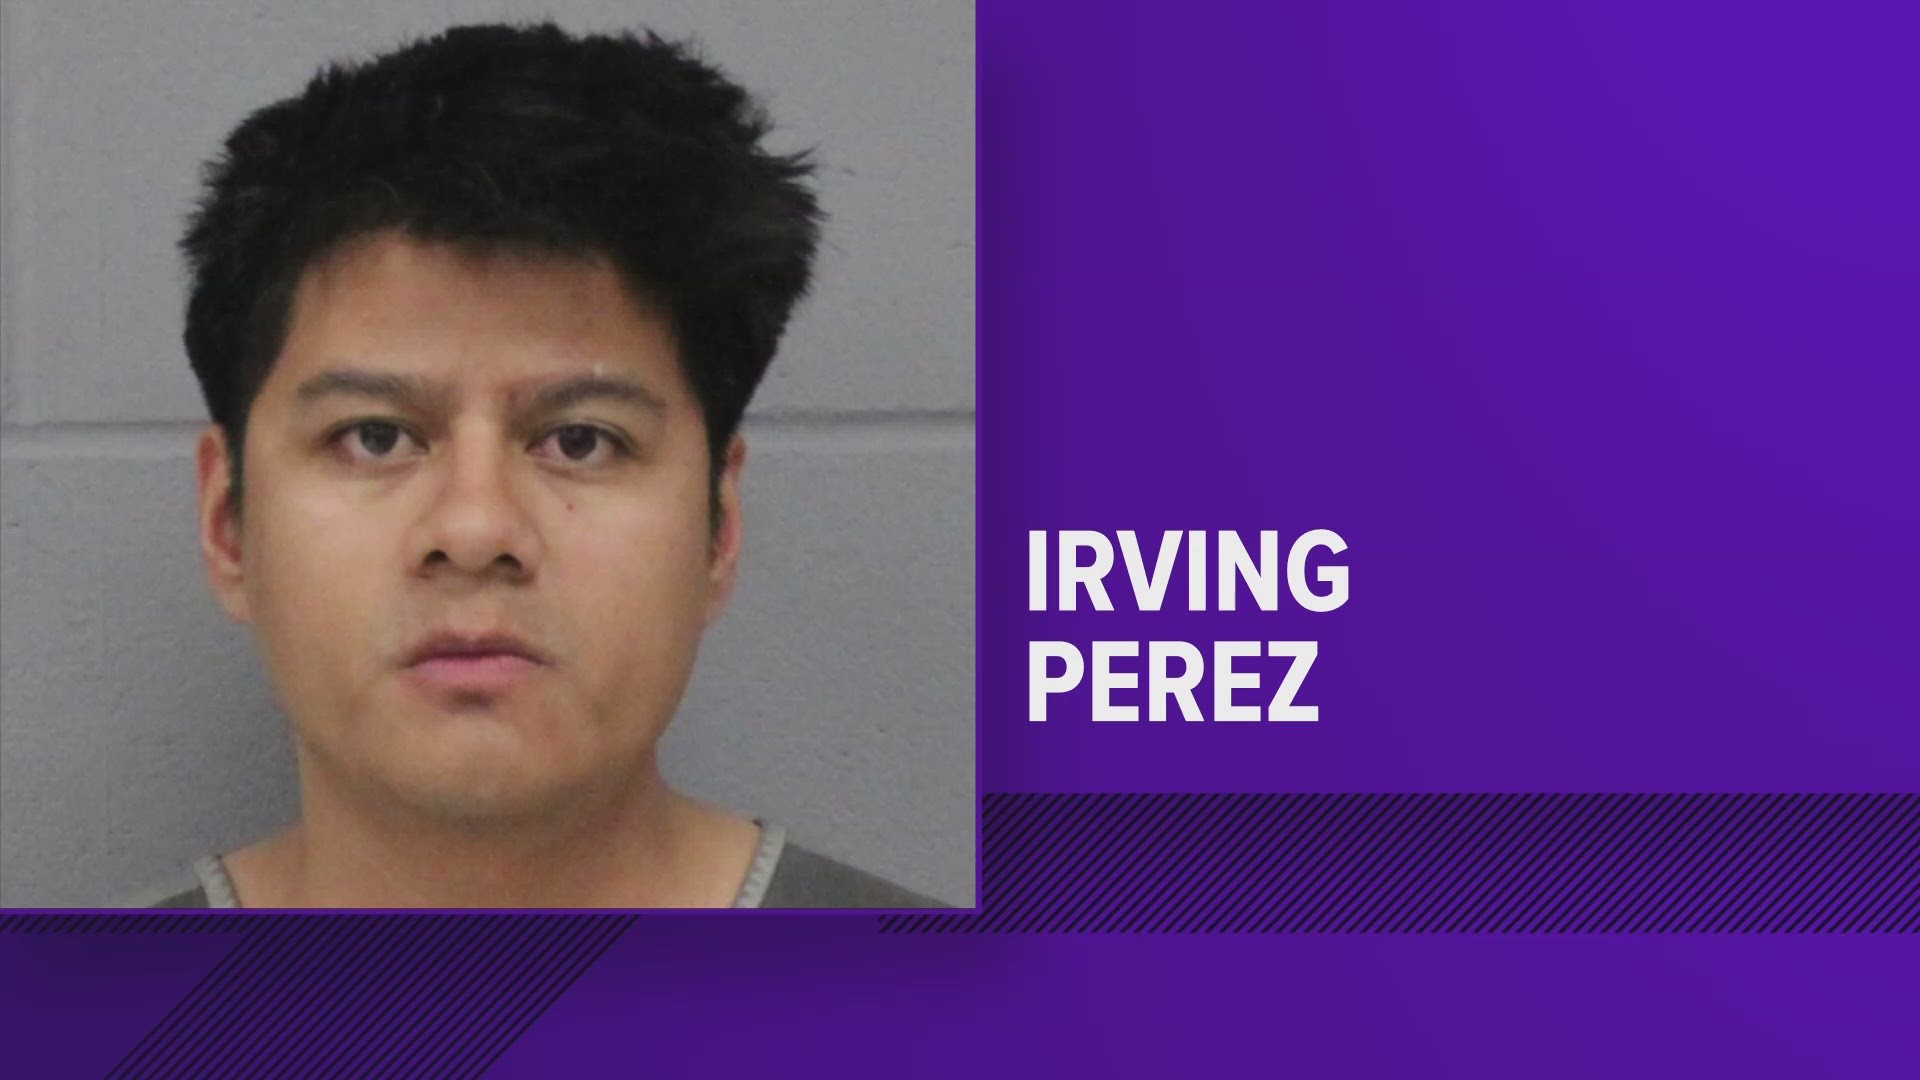 Irving Perez was arrested on Monday night and faces a third-degree felony charge.